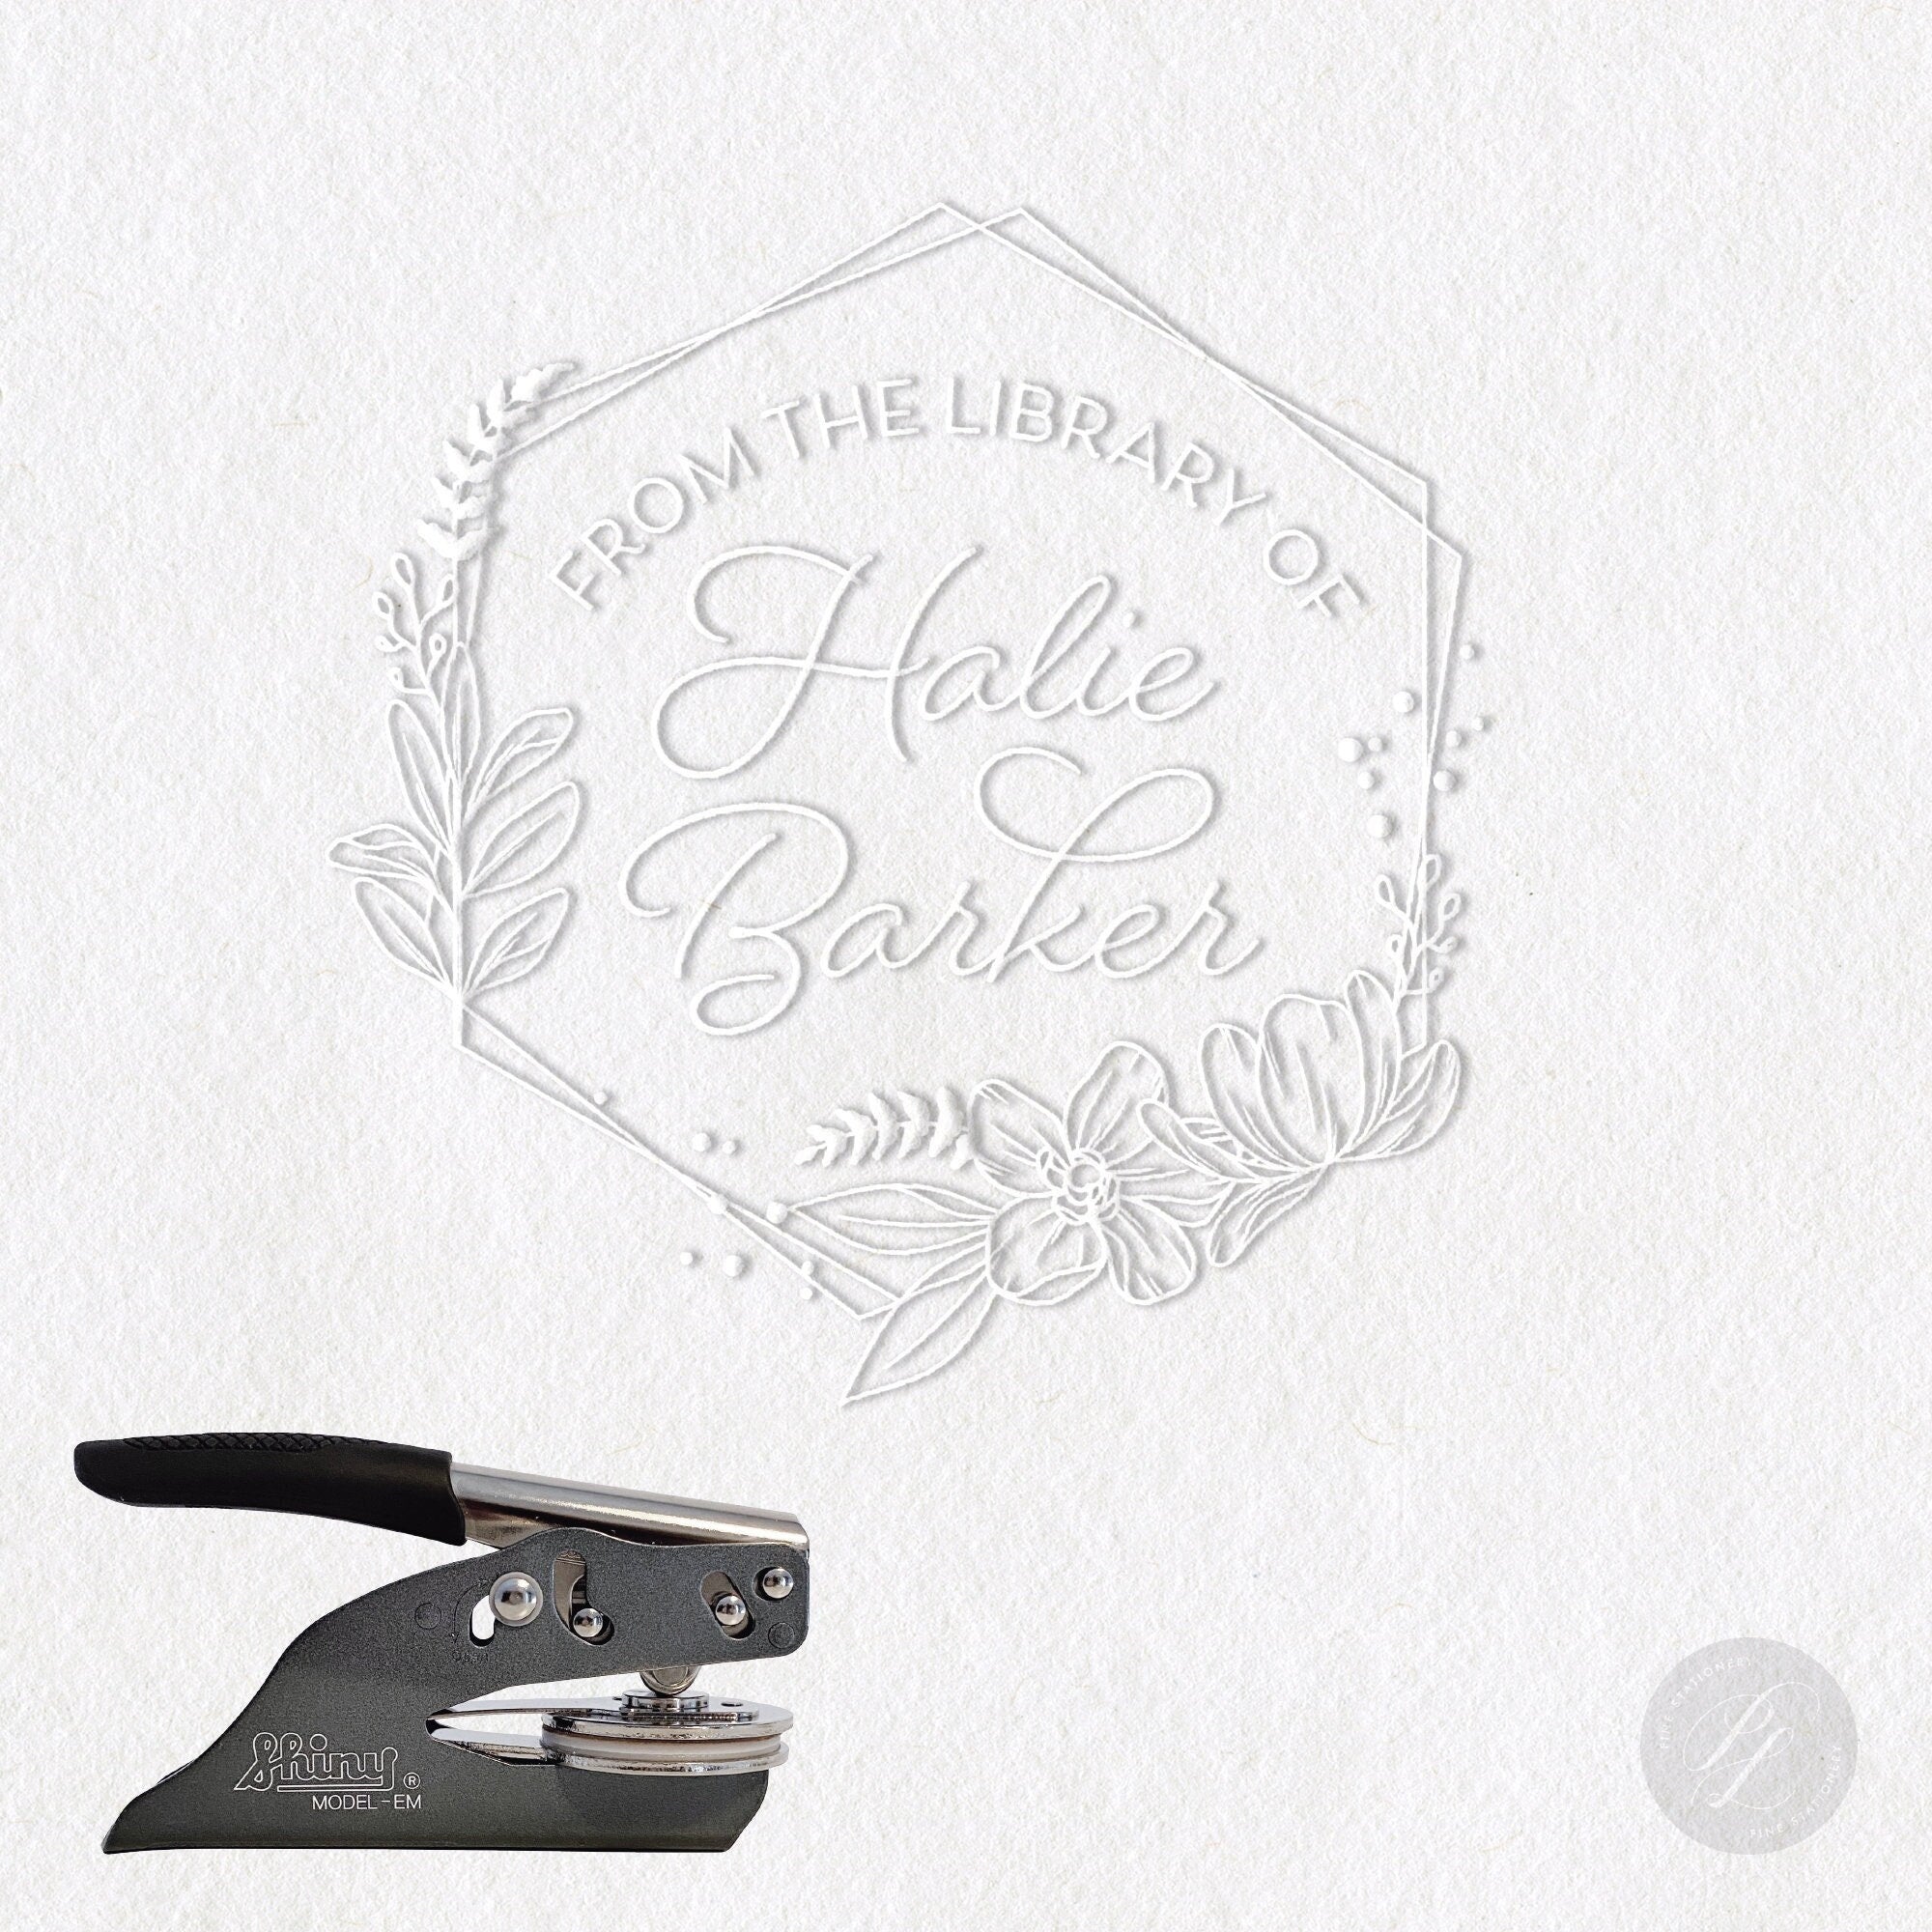 Personalized Embosser Book Stamp - from The Library of - Book Embosser, Personalized Book Embosser, Personal Library Embosser, Custom Embosser  Stamp